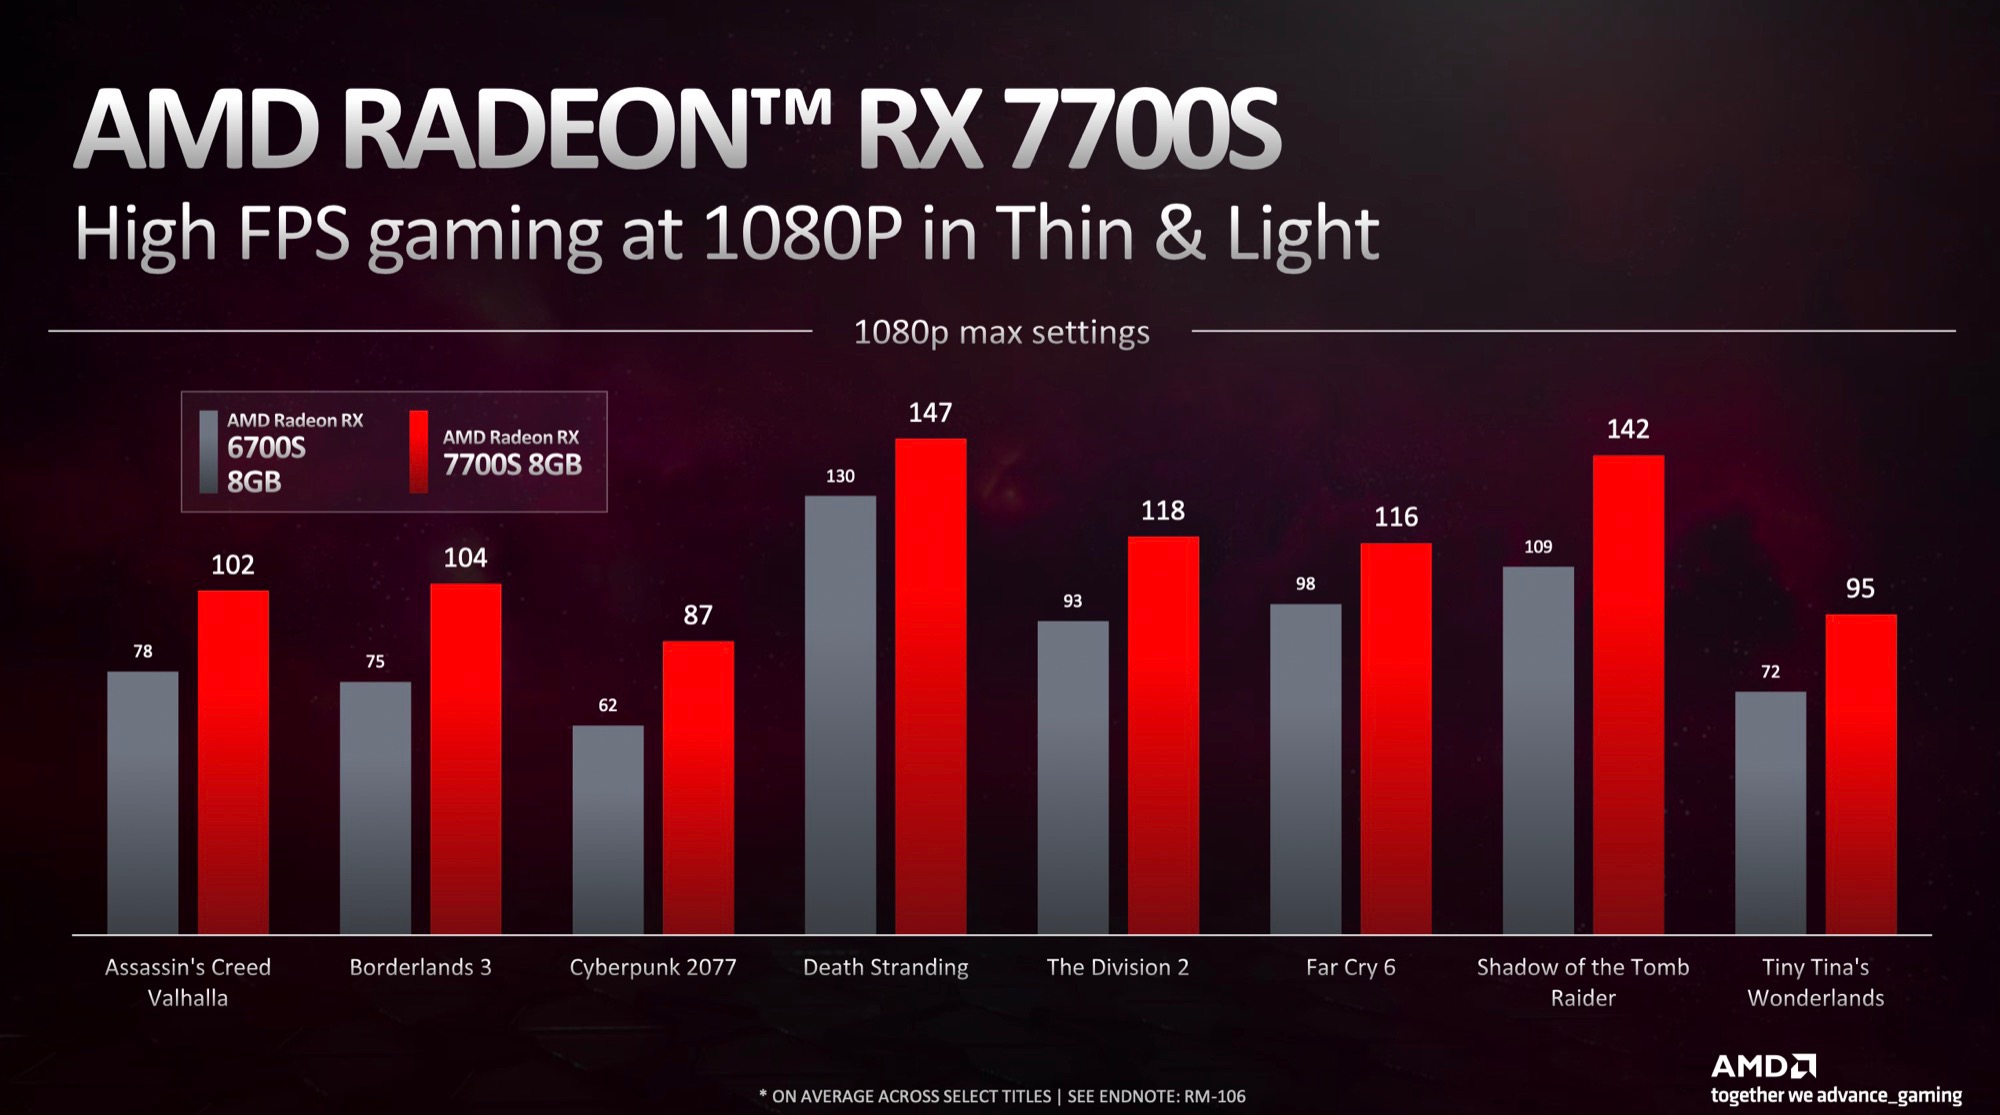 focus toxiciteit George Hanbury AMD Radeon RX 7700S GPU - Benchmarks and Specs - NotebookCheck.net Tech